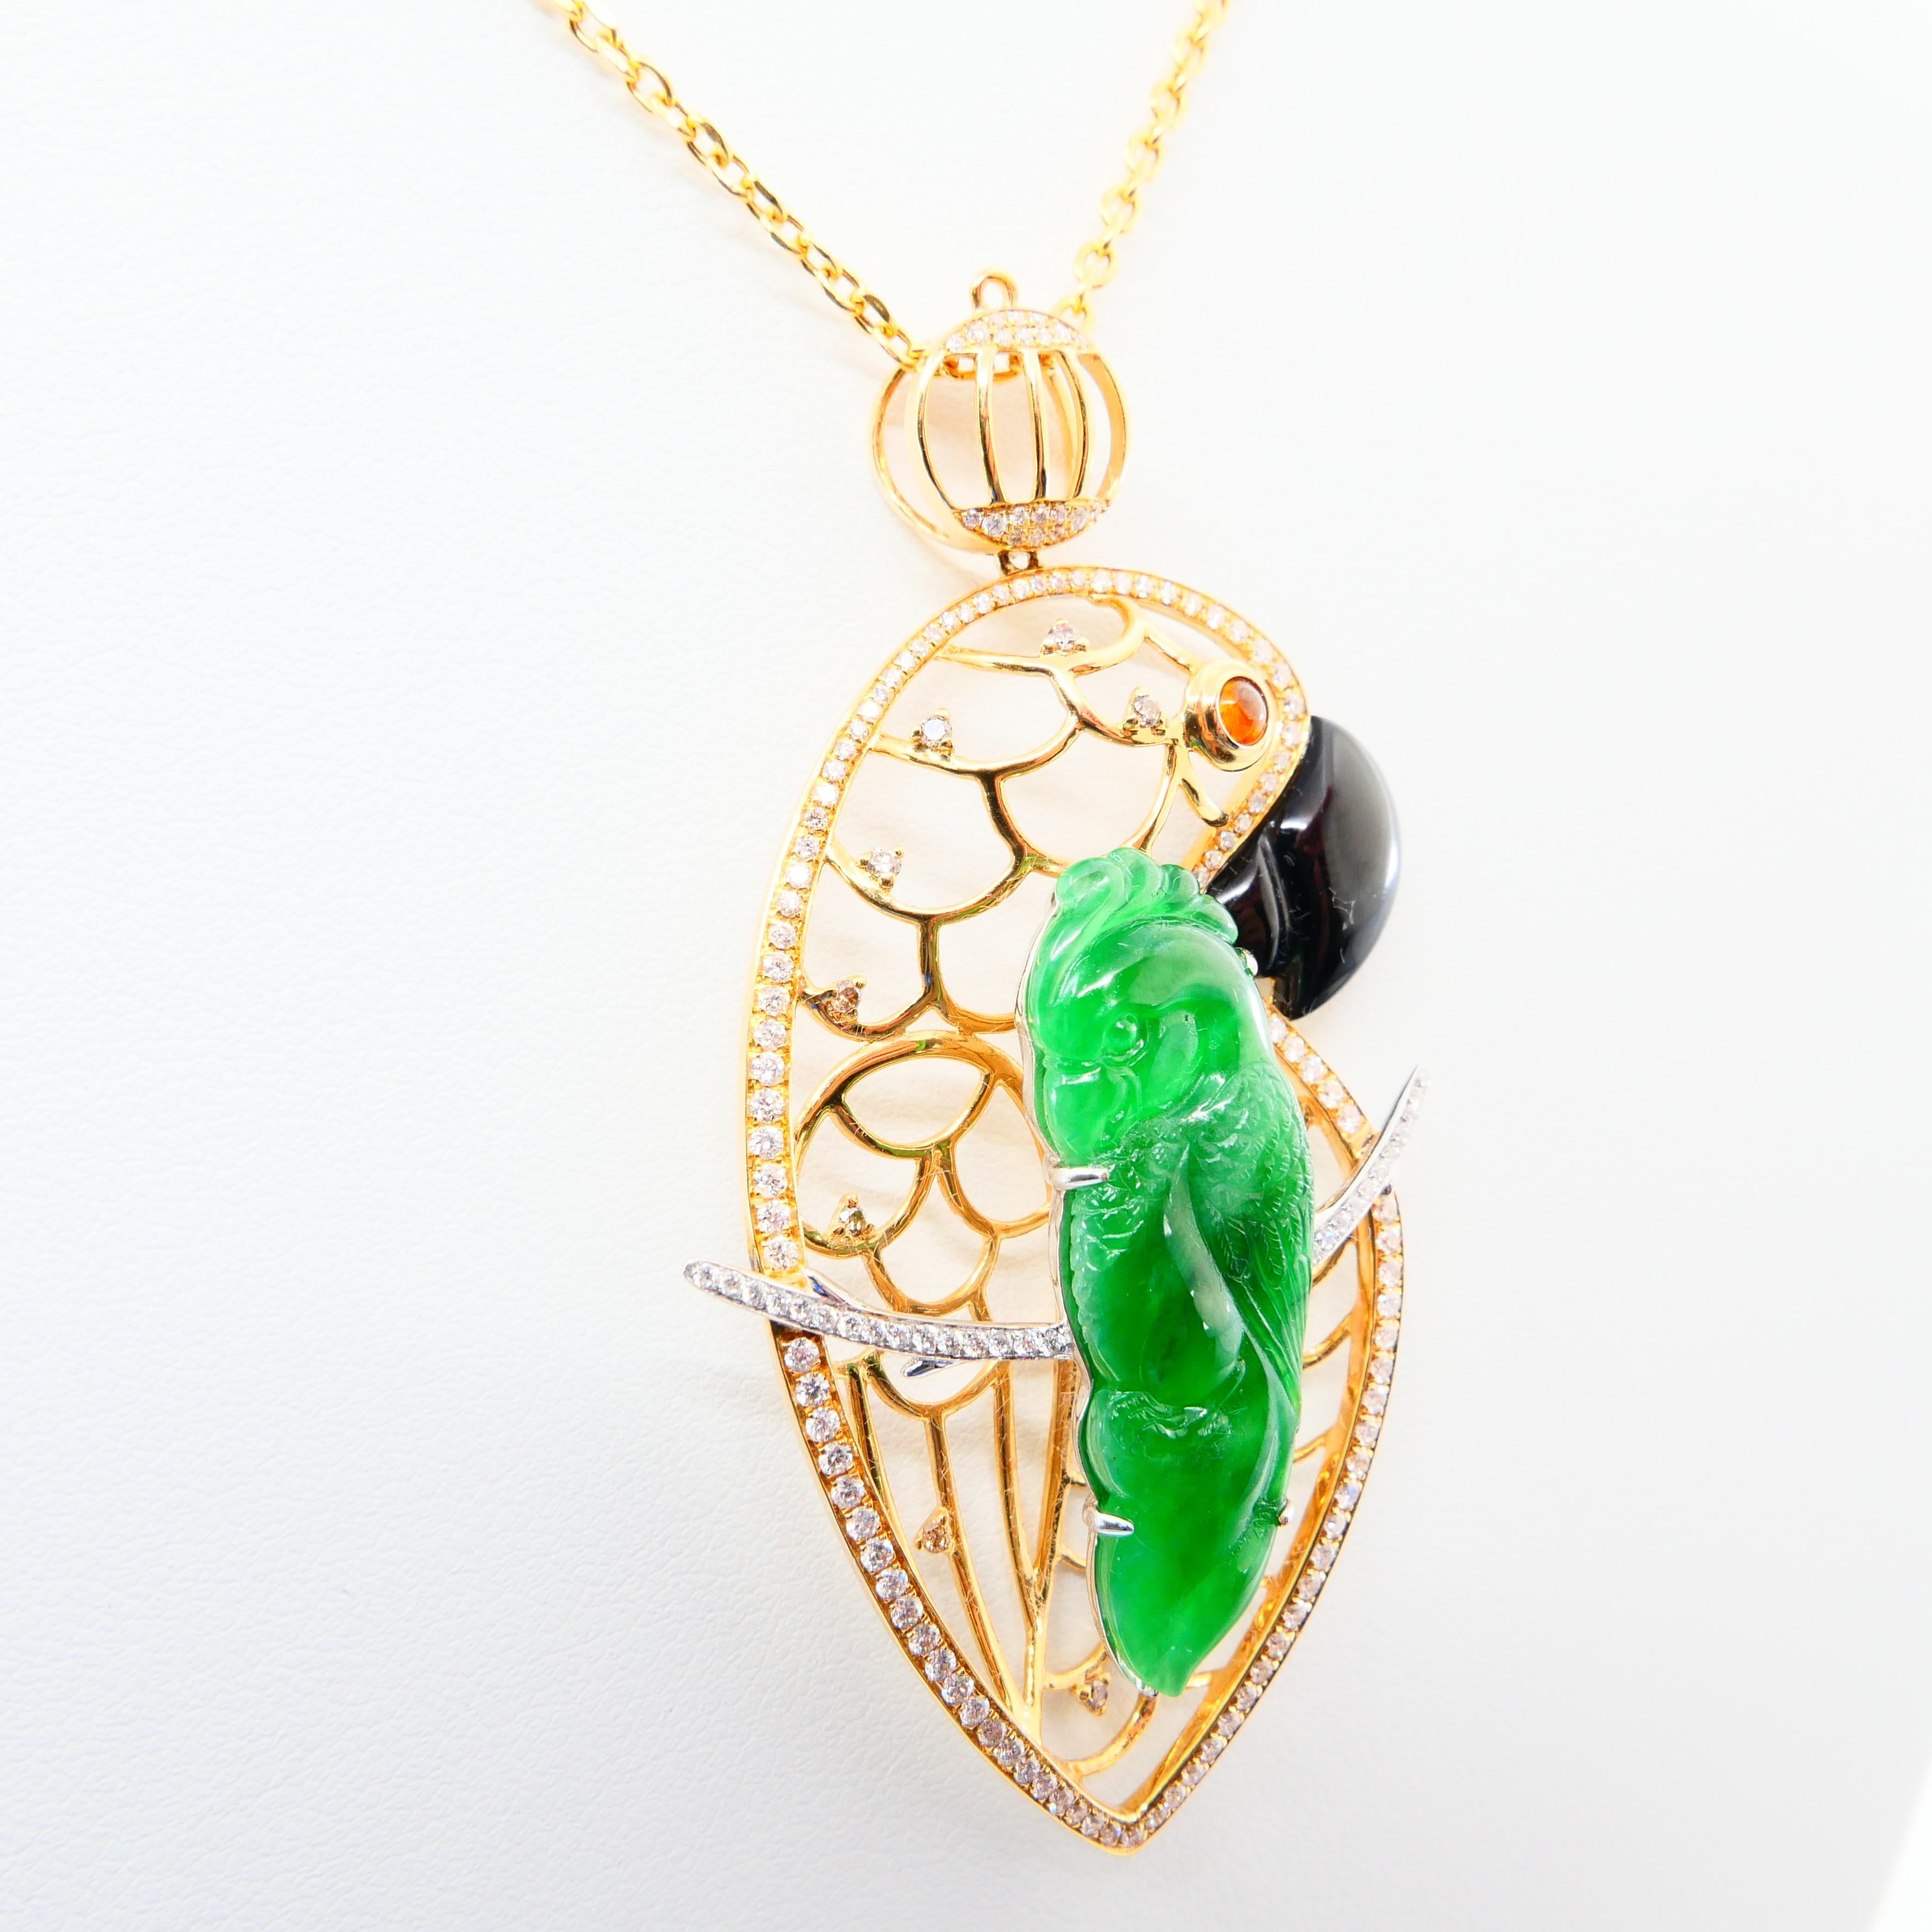 Certified Type A Jadeite Jade and Diamond Parrot Pendant, Vivid Green Color For Sale 2